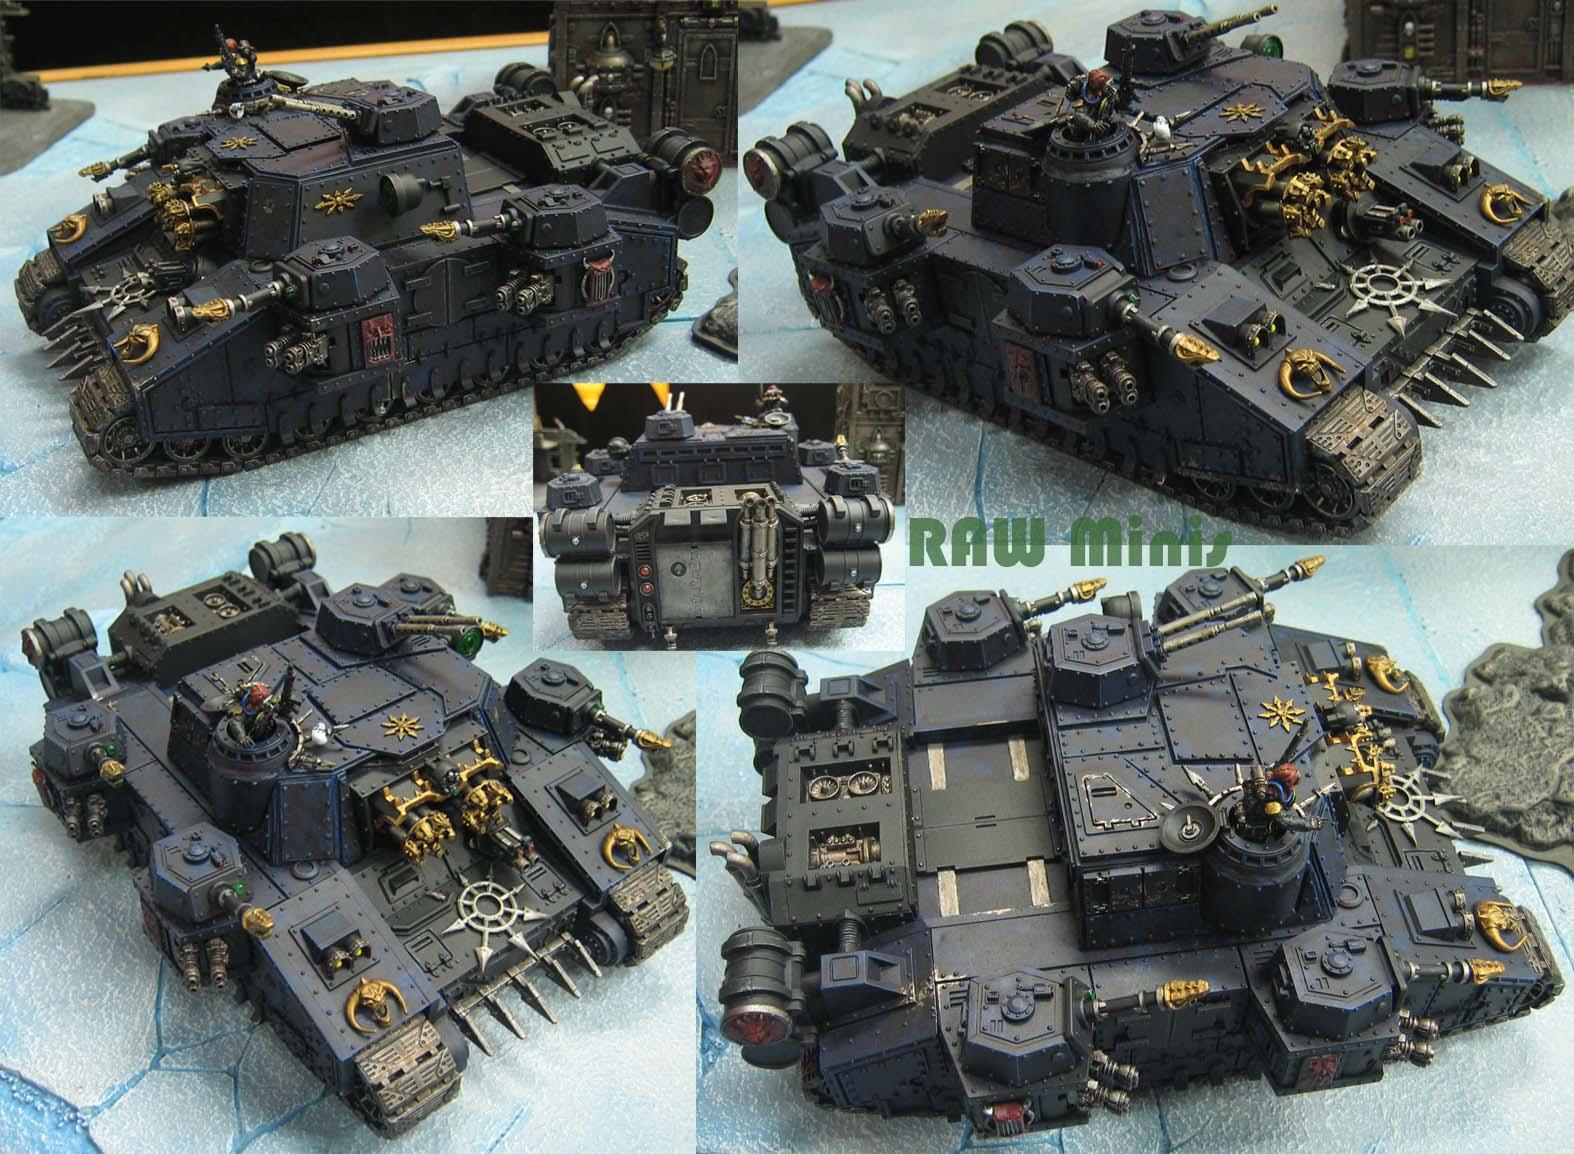 Apocalypse, Baneblade, Chaos, Chaos Space Marines, Conversion, Painting, Scratch Build, Stormlord, Tank, Warhammer 40,000